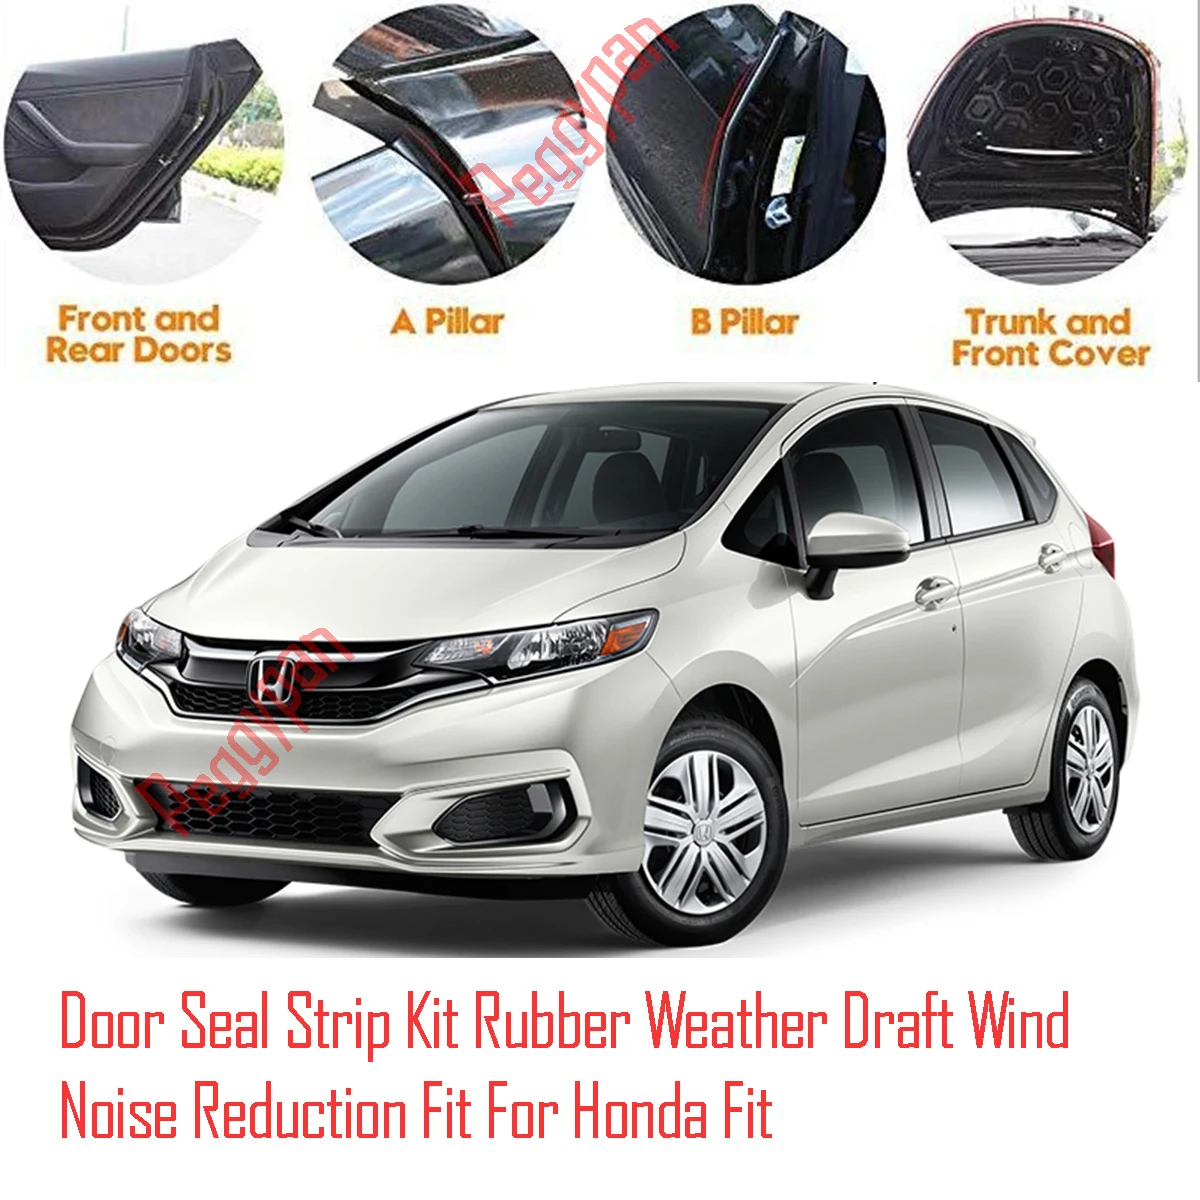 Door Seal Strip Kit Self Adhesive Window Engine Cover Soundproof Rubber Weather Draft Wind Noise Reduction Fit For Honda Fit